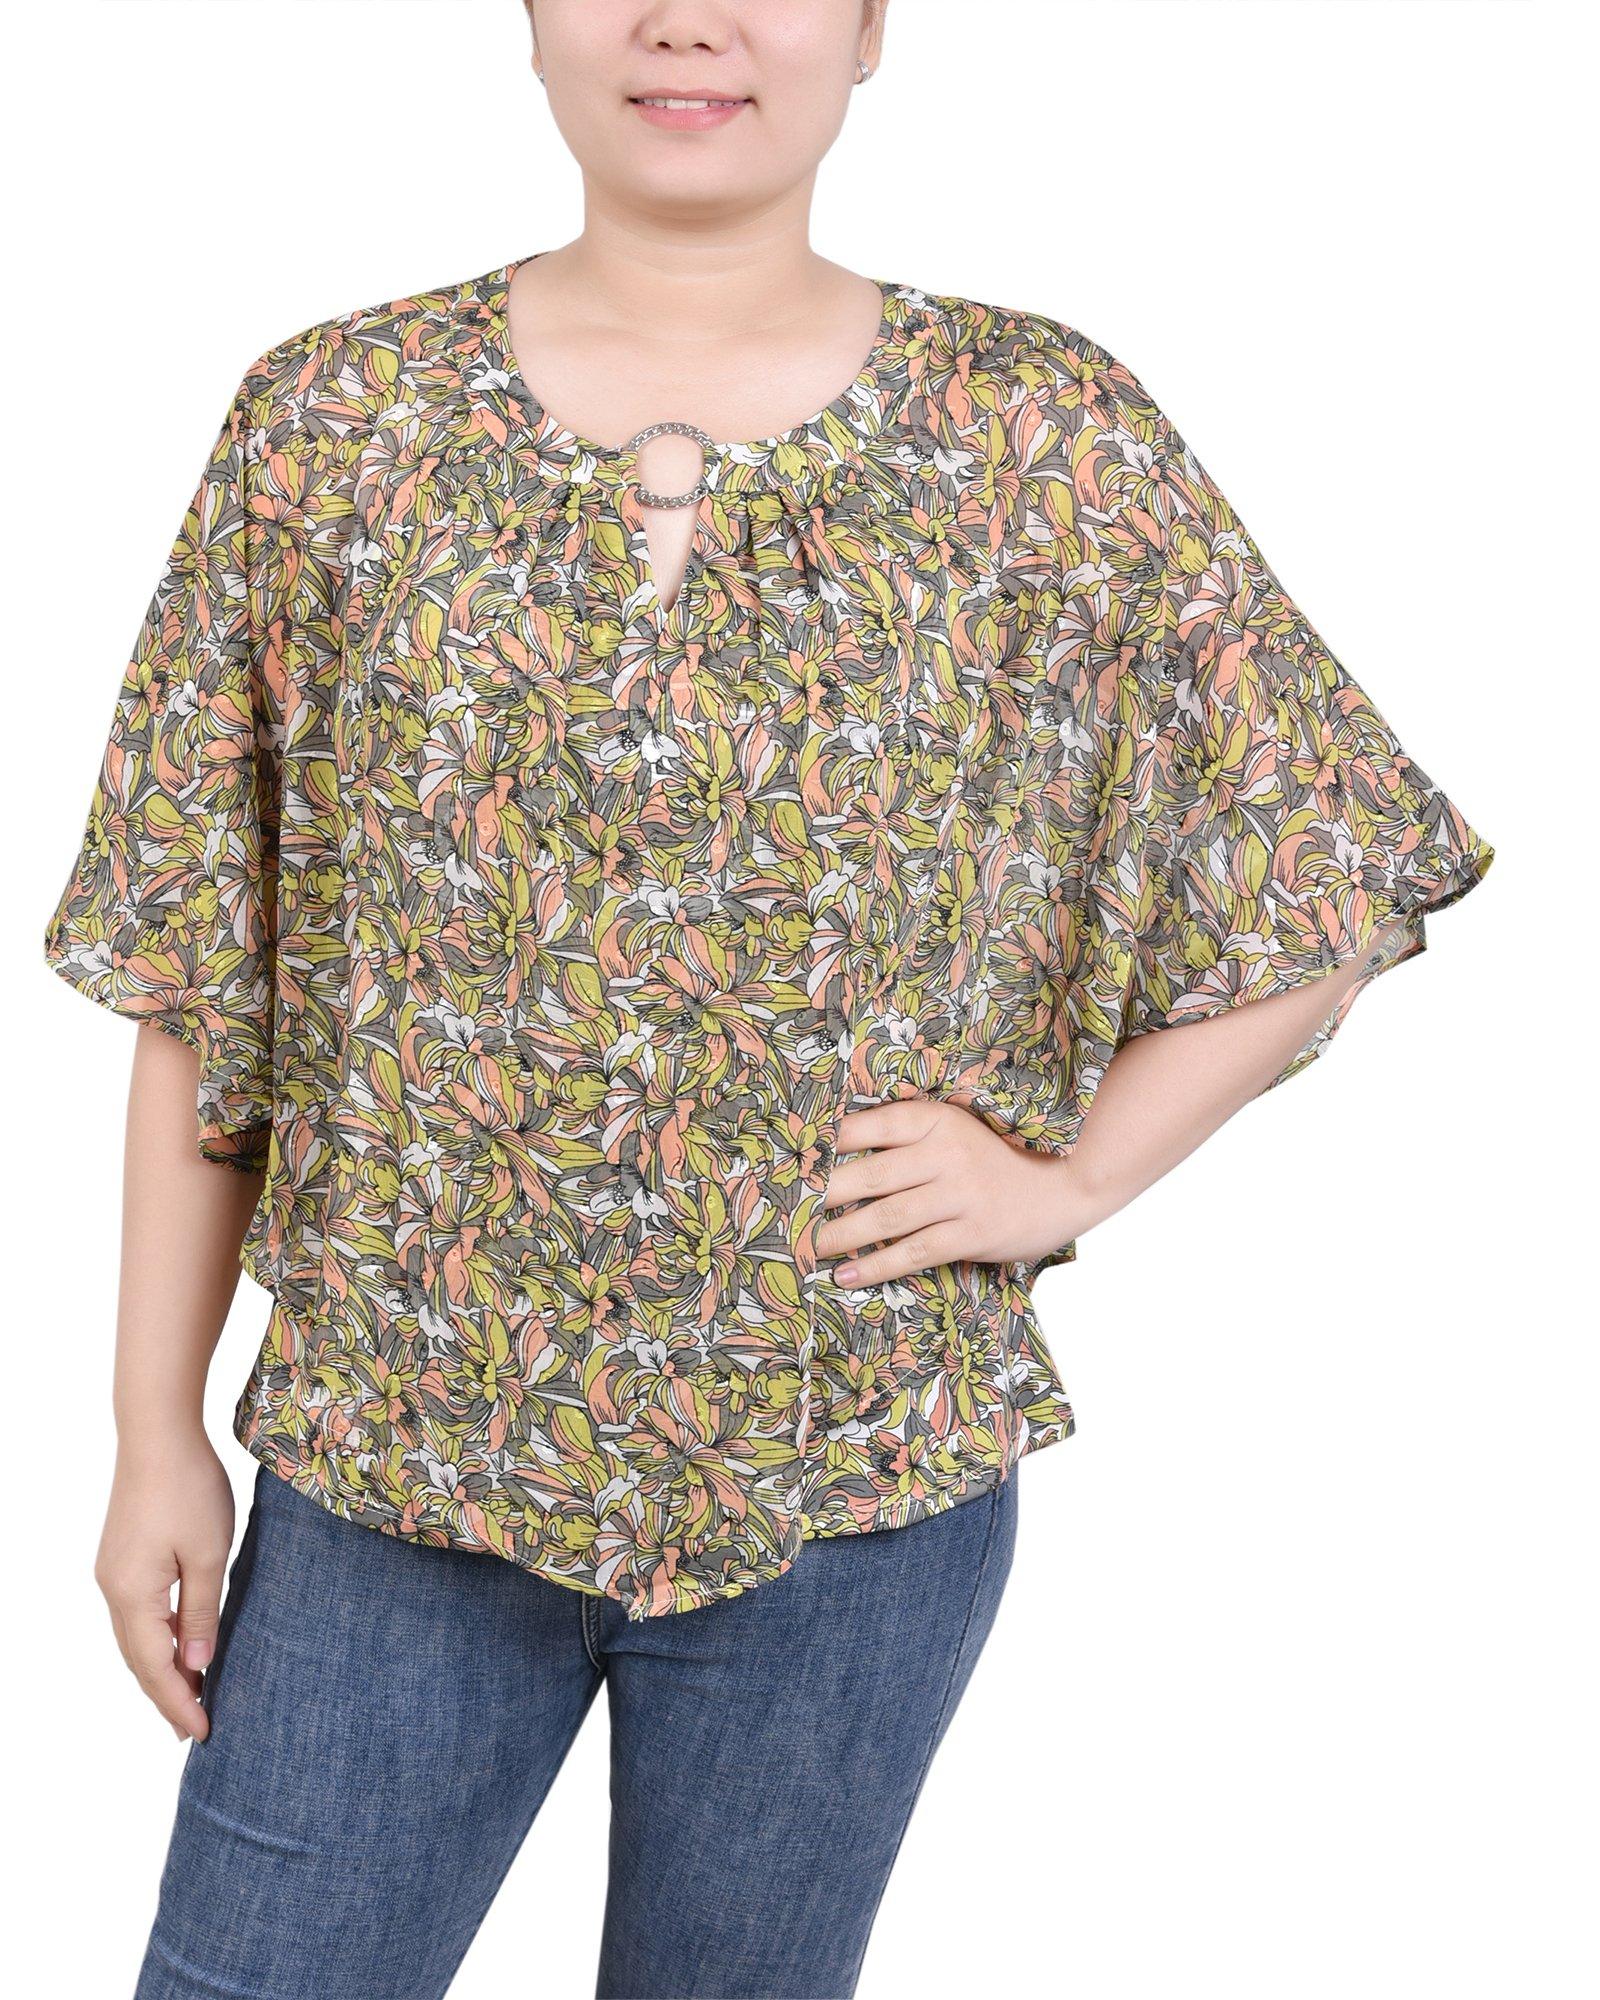 Womens Chiffon Poncho Top With Ring